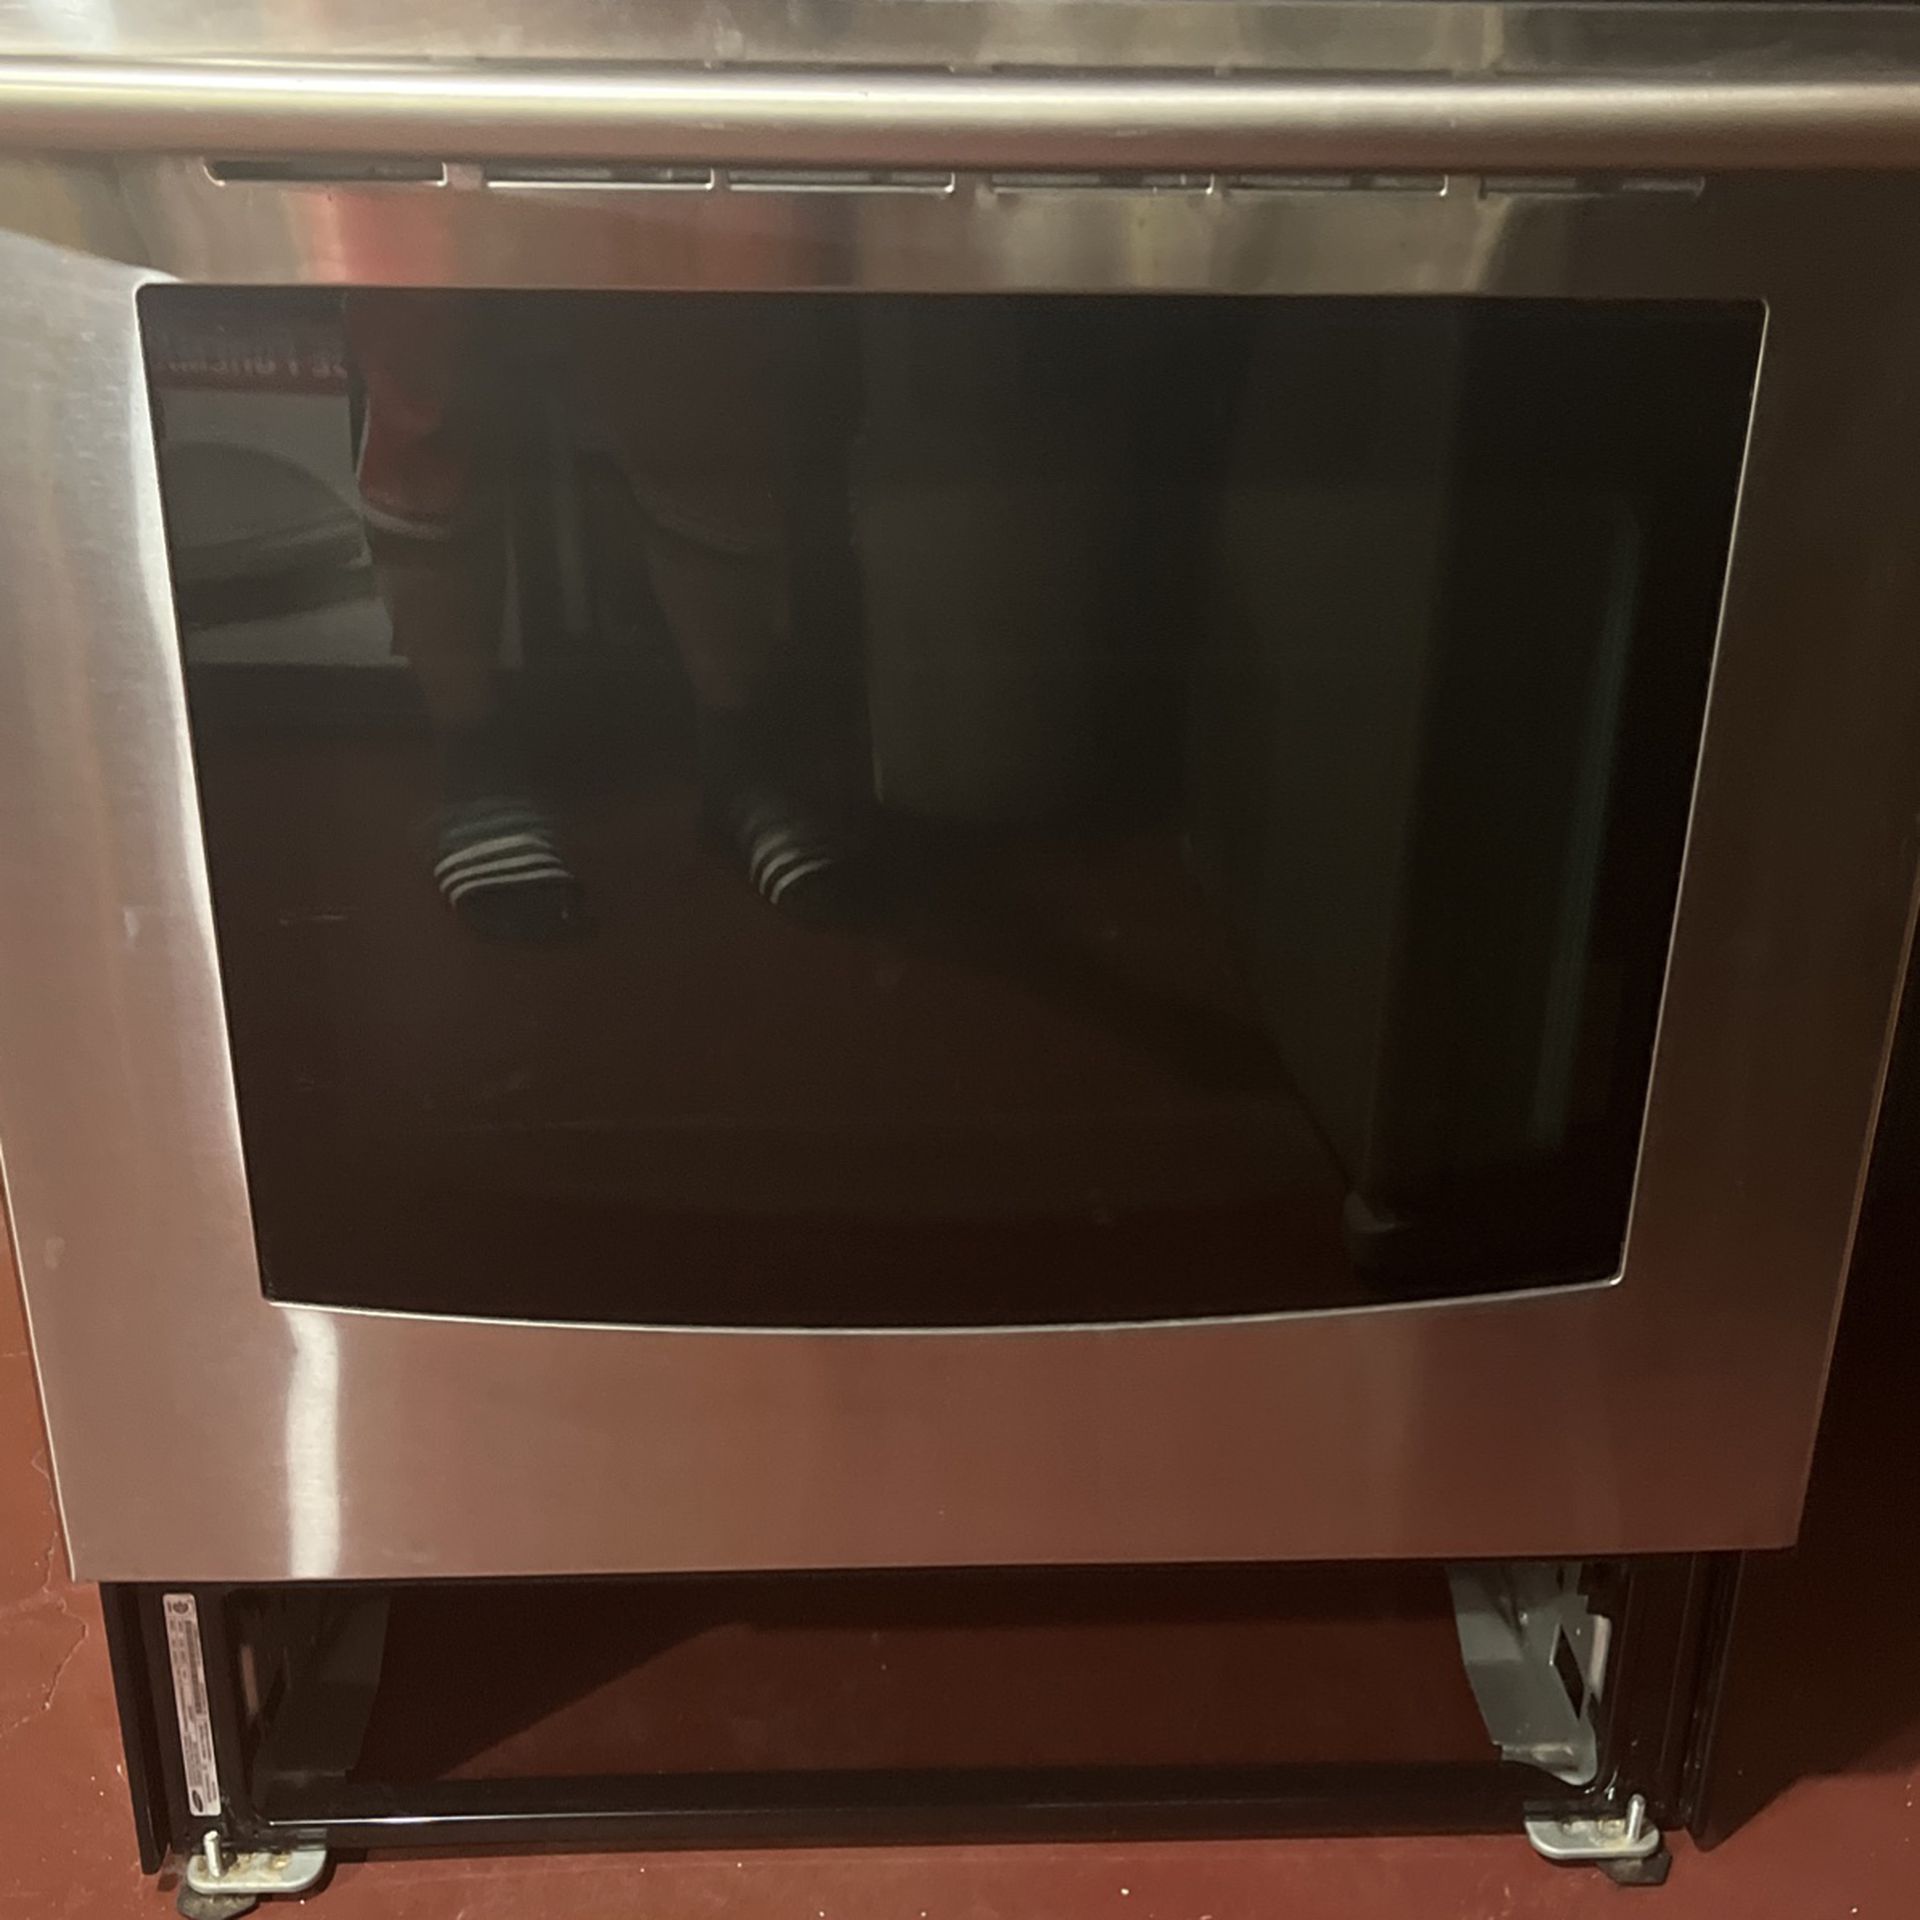 Like new only four years old selling an electric stove for 350